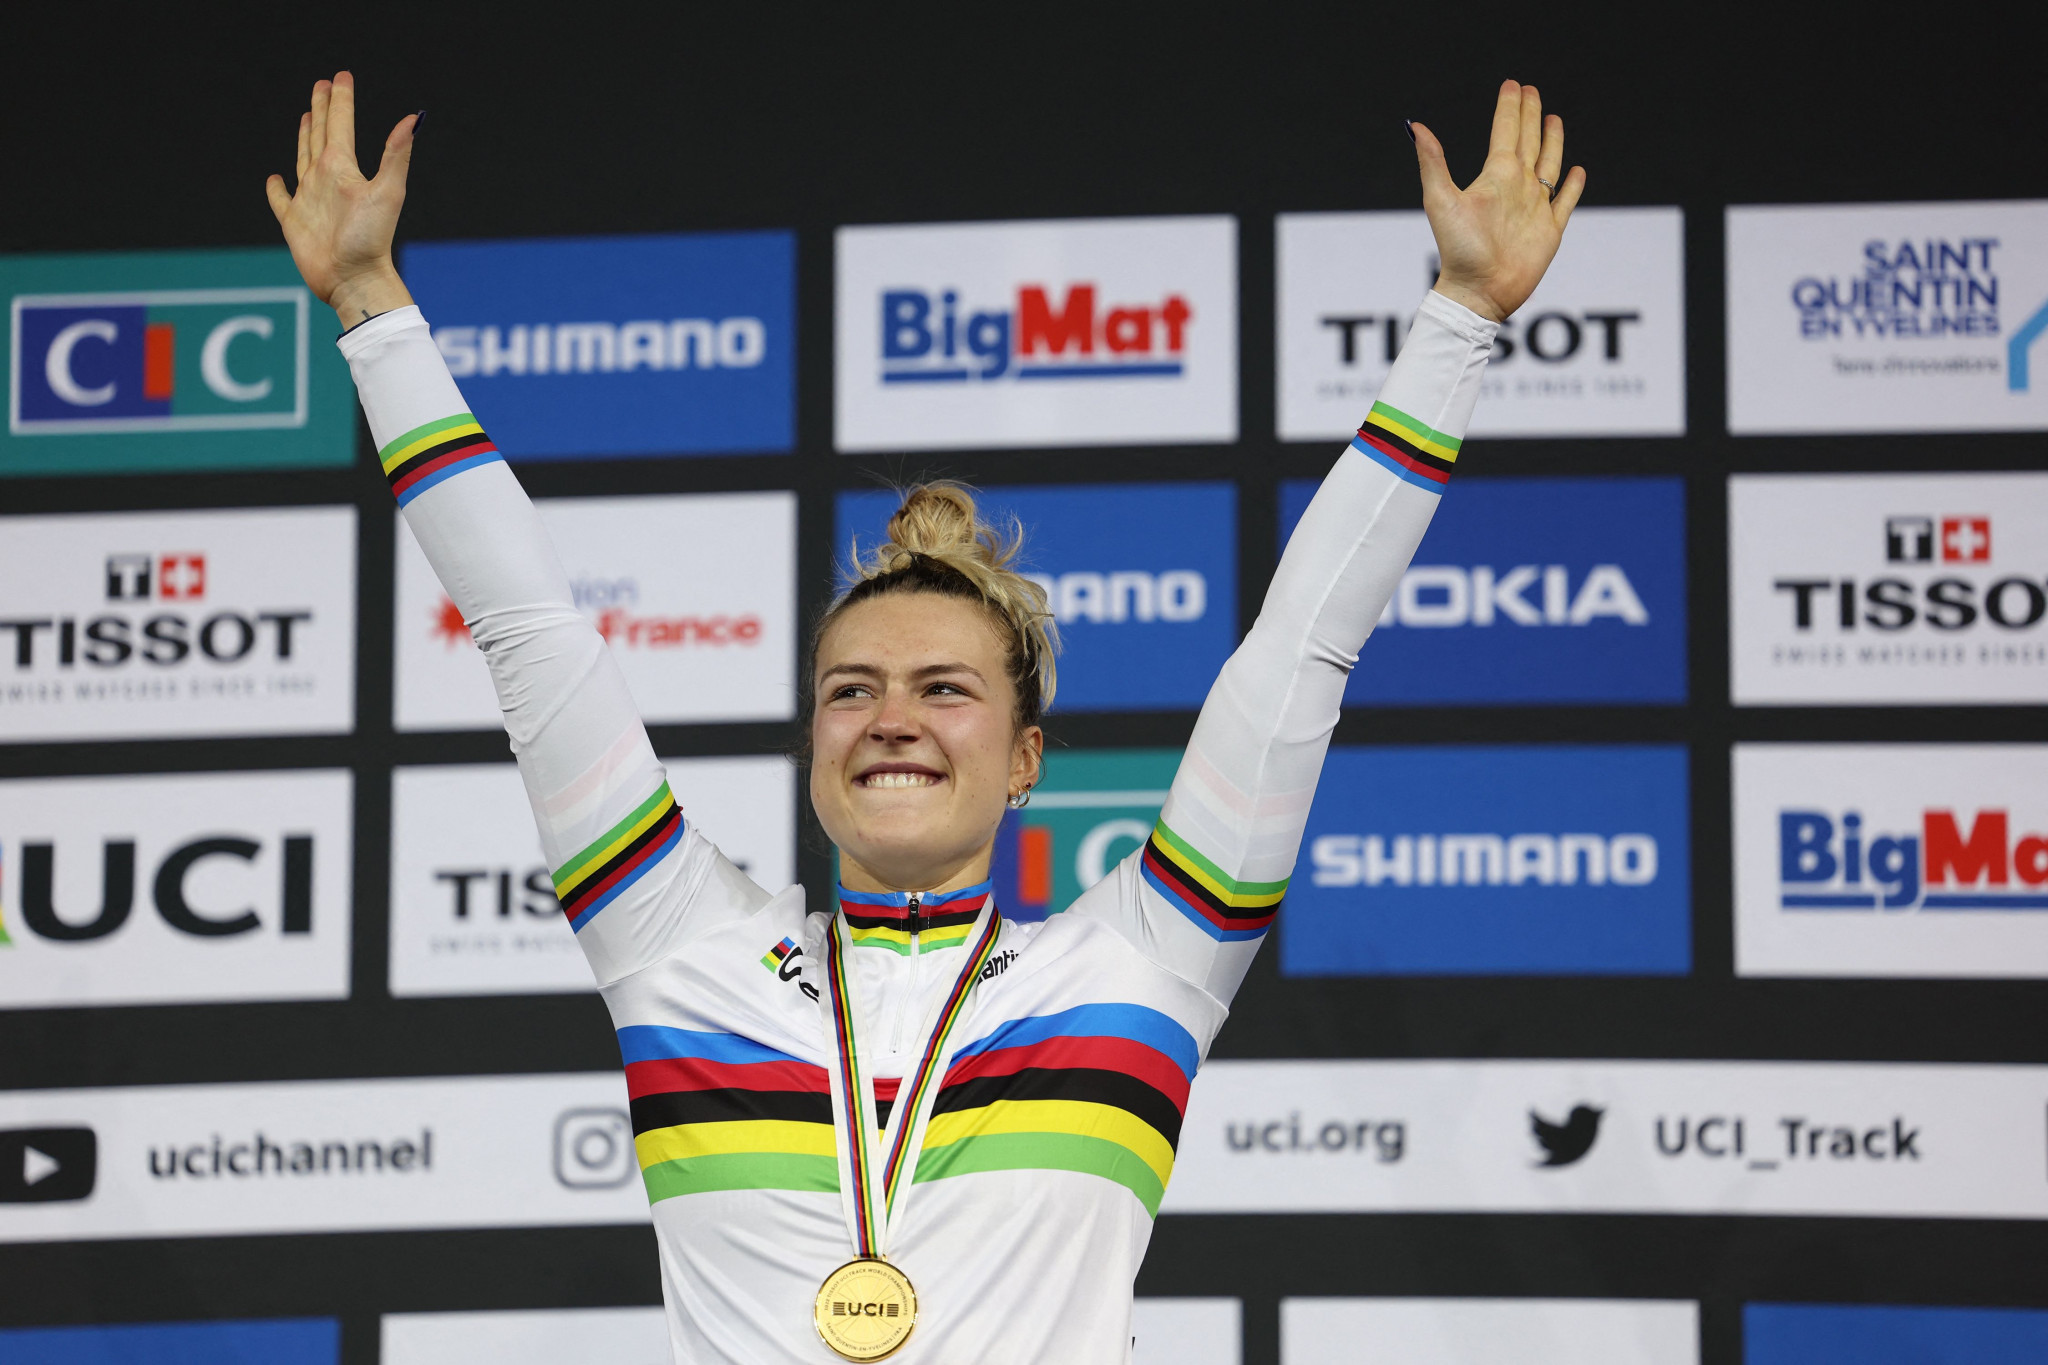 Mathilde Gros raises her arms in celebration after winning the women's sprint title ©Getty Images